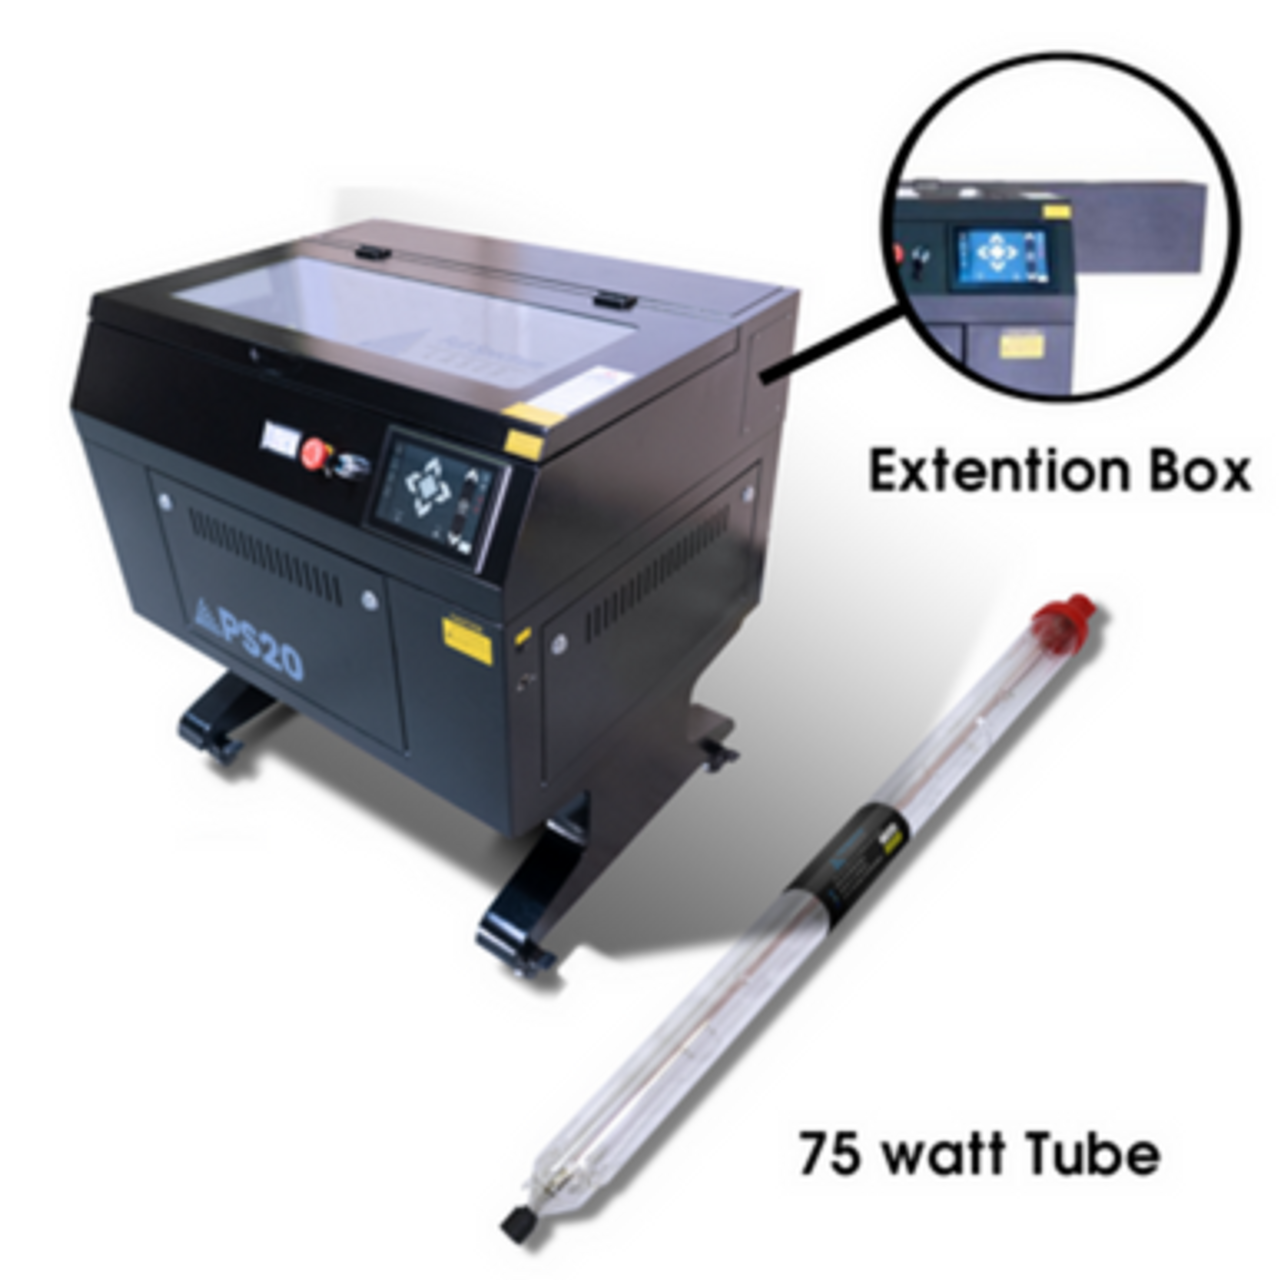 NEW! F20 Energy entry-level Fiber laser solution with 175x175mm